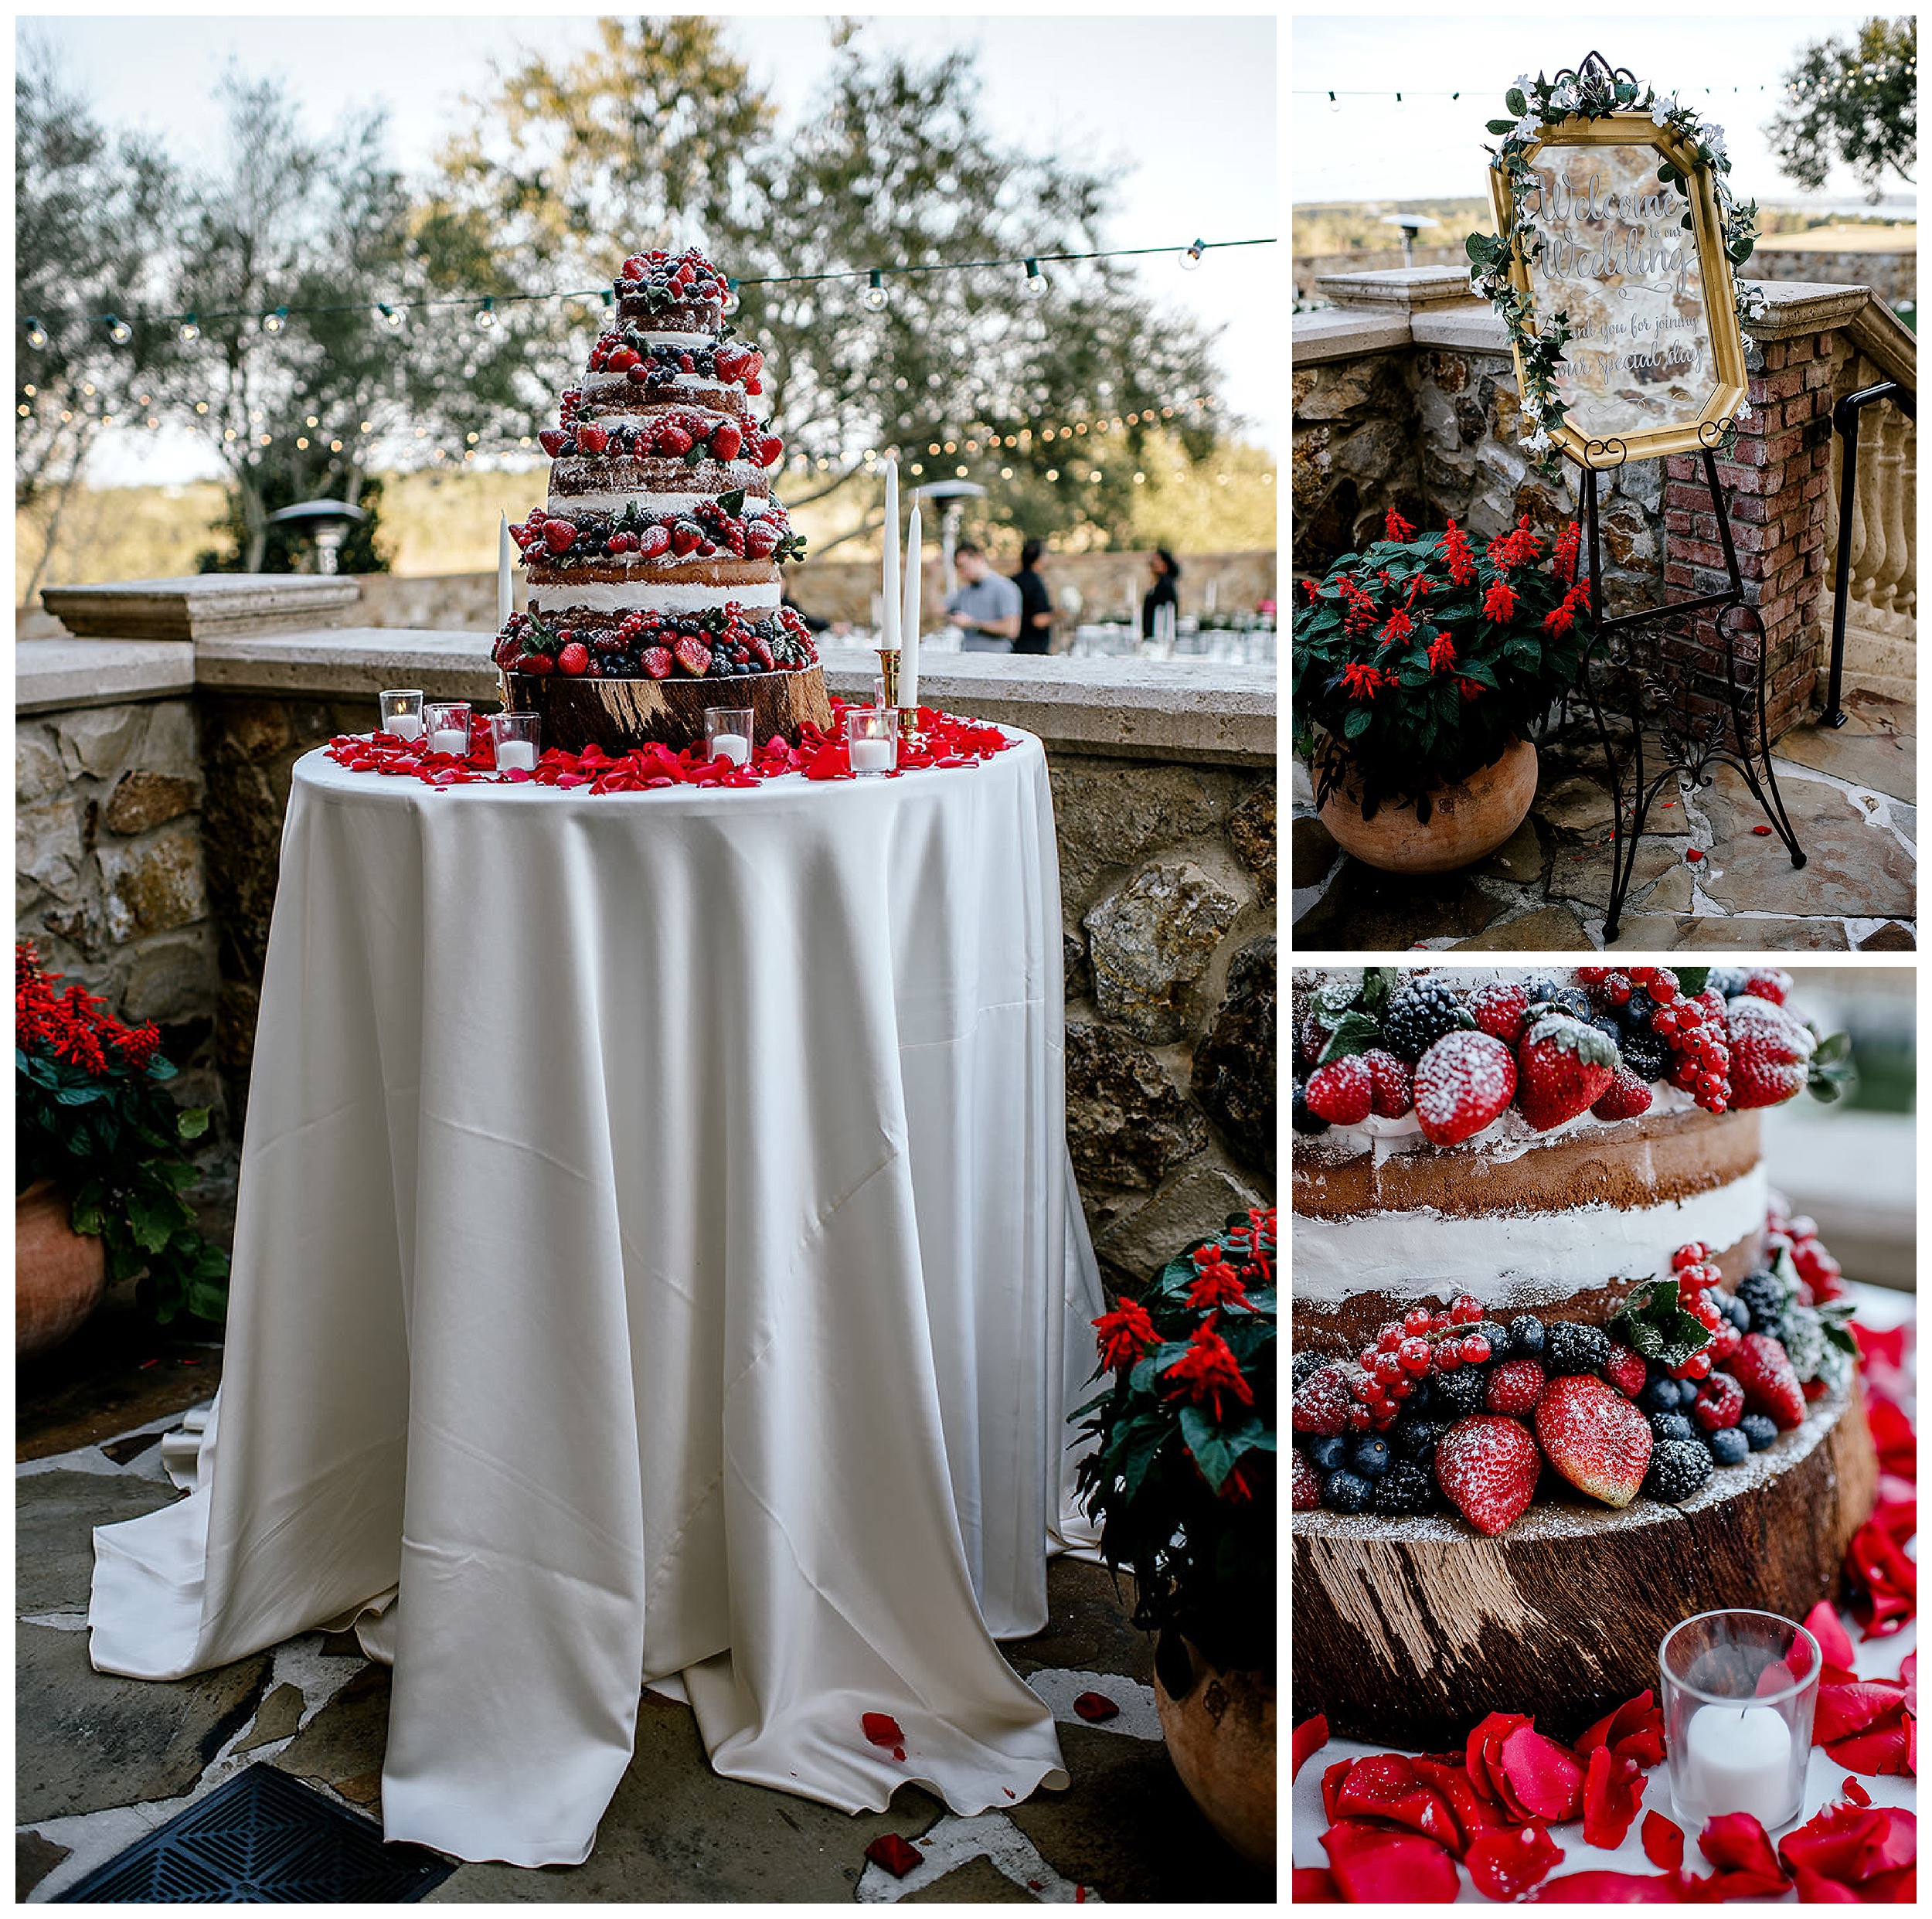 Beautiful naked wedding cake filled with fruit, with red rose petals all around it